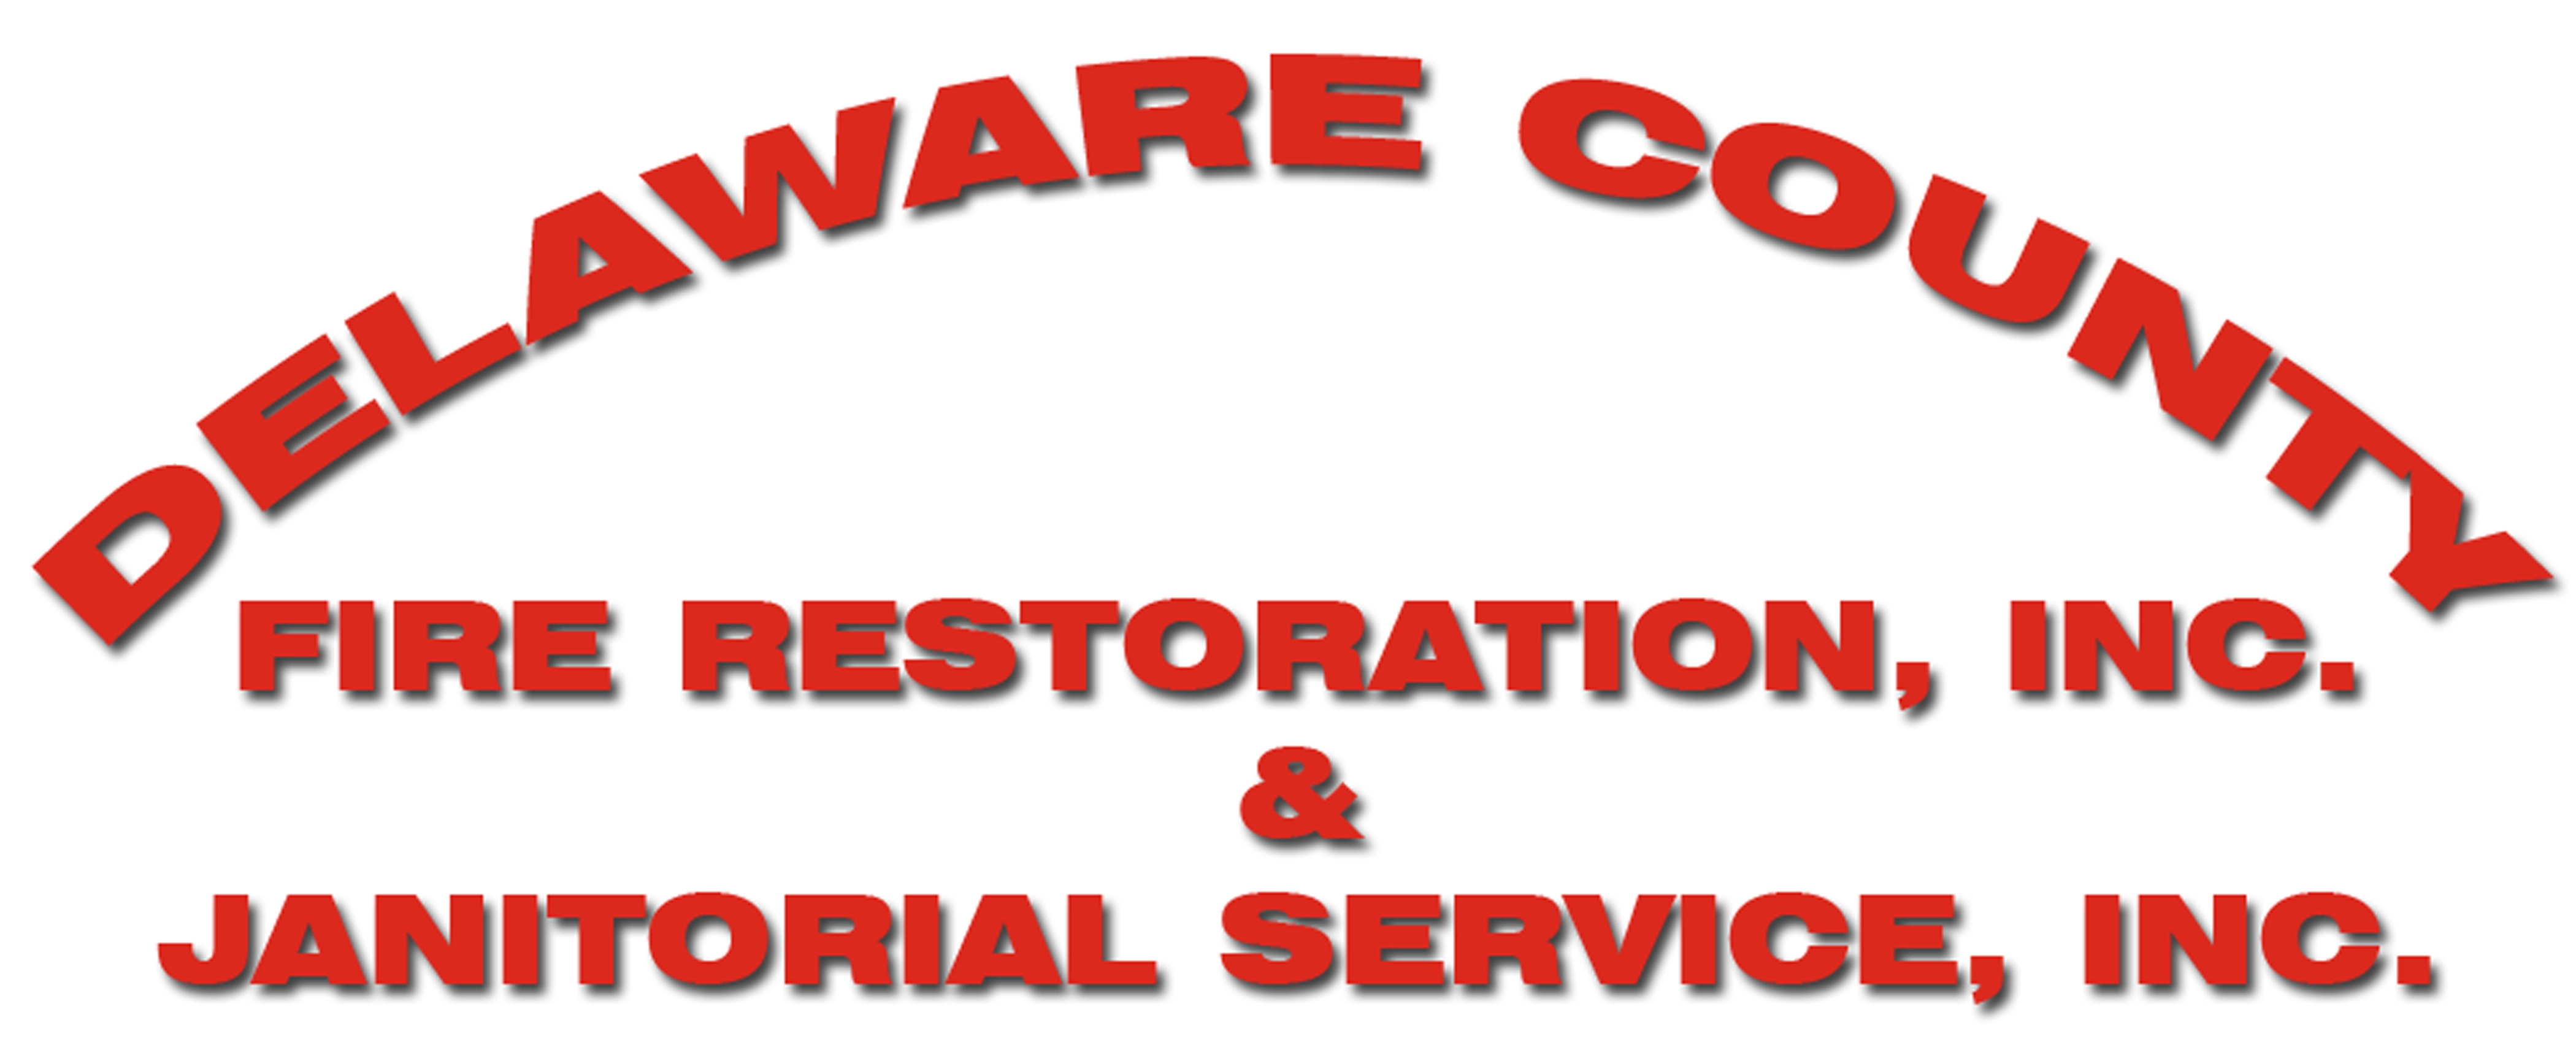 Delaware County Janitorial and Fire Restoration logo